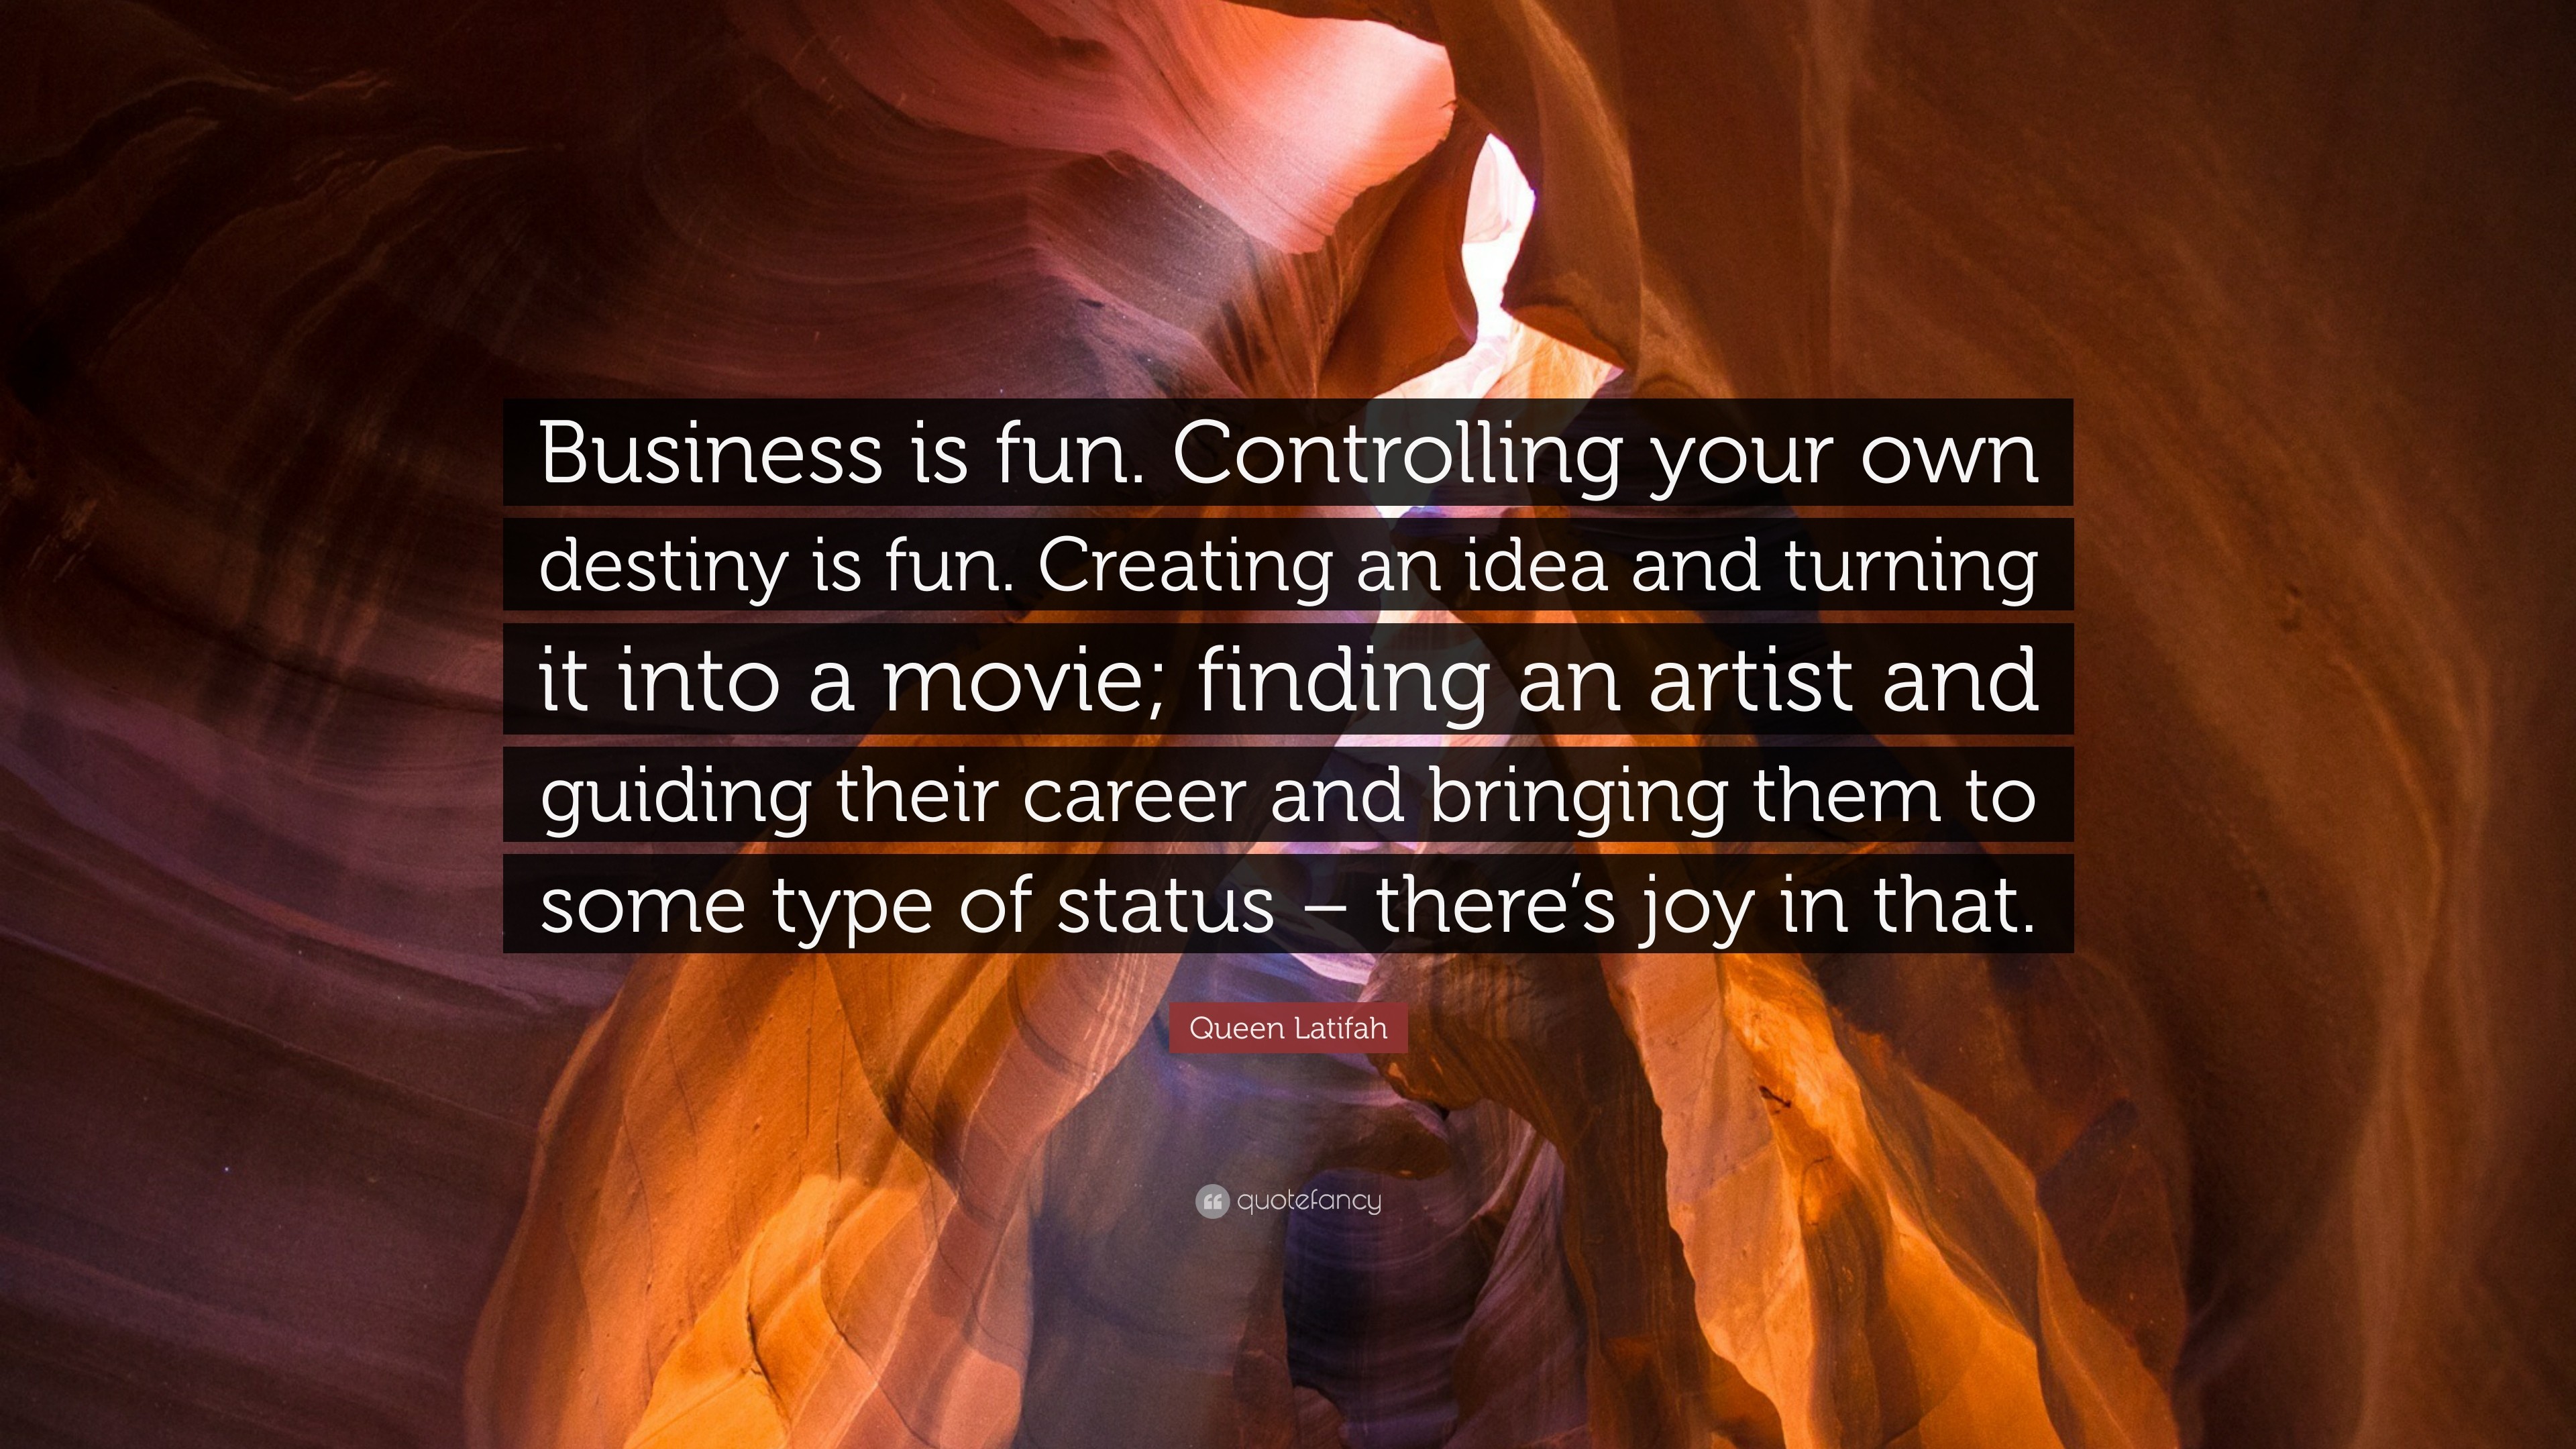 3840x2160 Queen Latifah Quote: “Business is fun. Controlling your own destiny is fun.